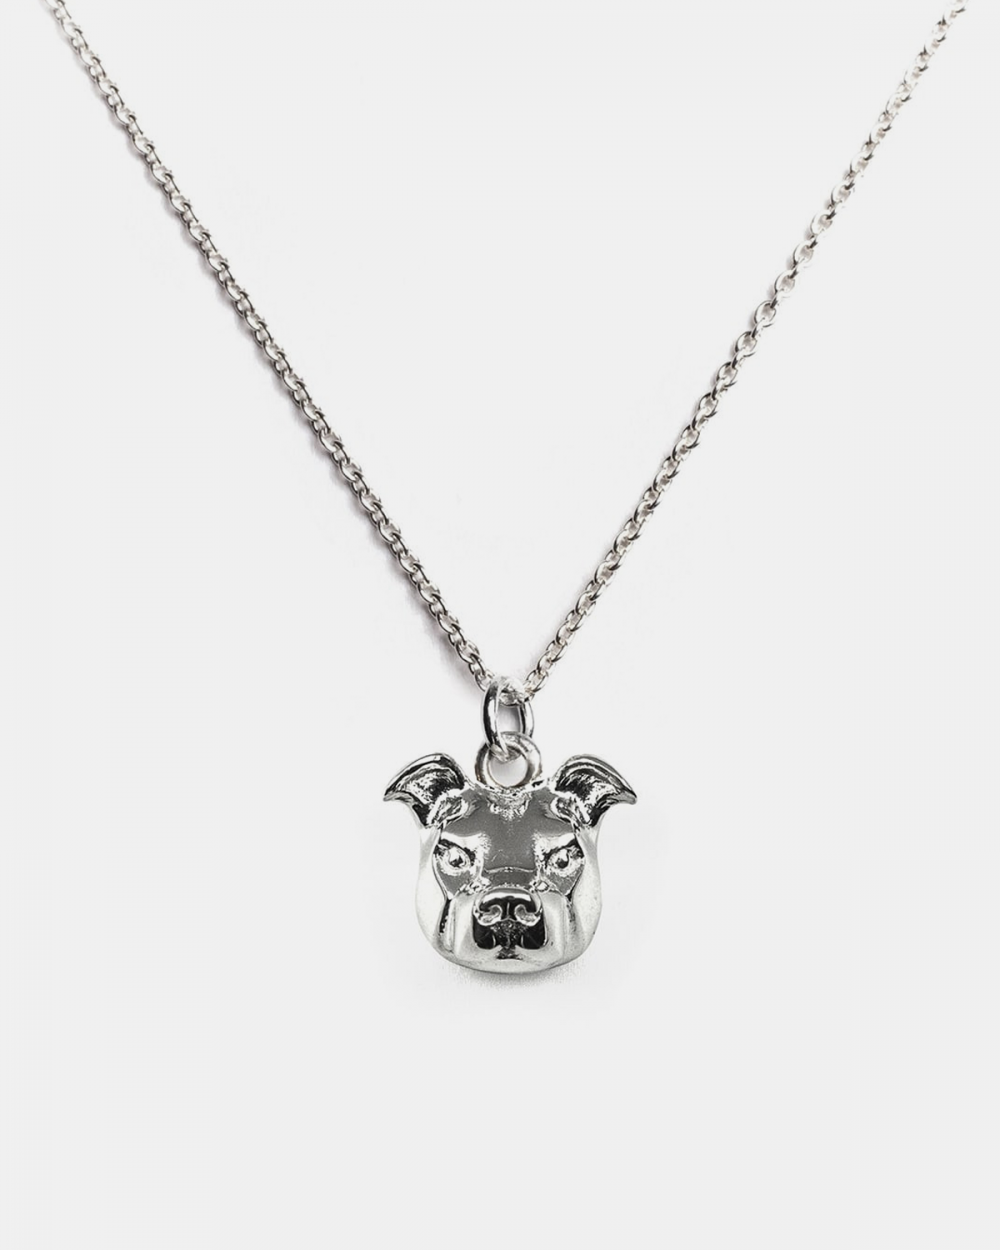 AMERICAN STAFFORDSHIRE PENDANT NECKLACE F040 L60 / POLISHED SILVER